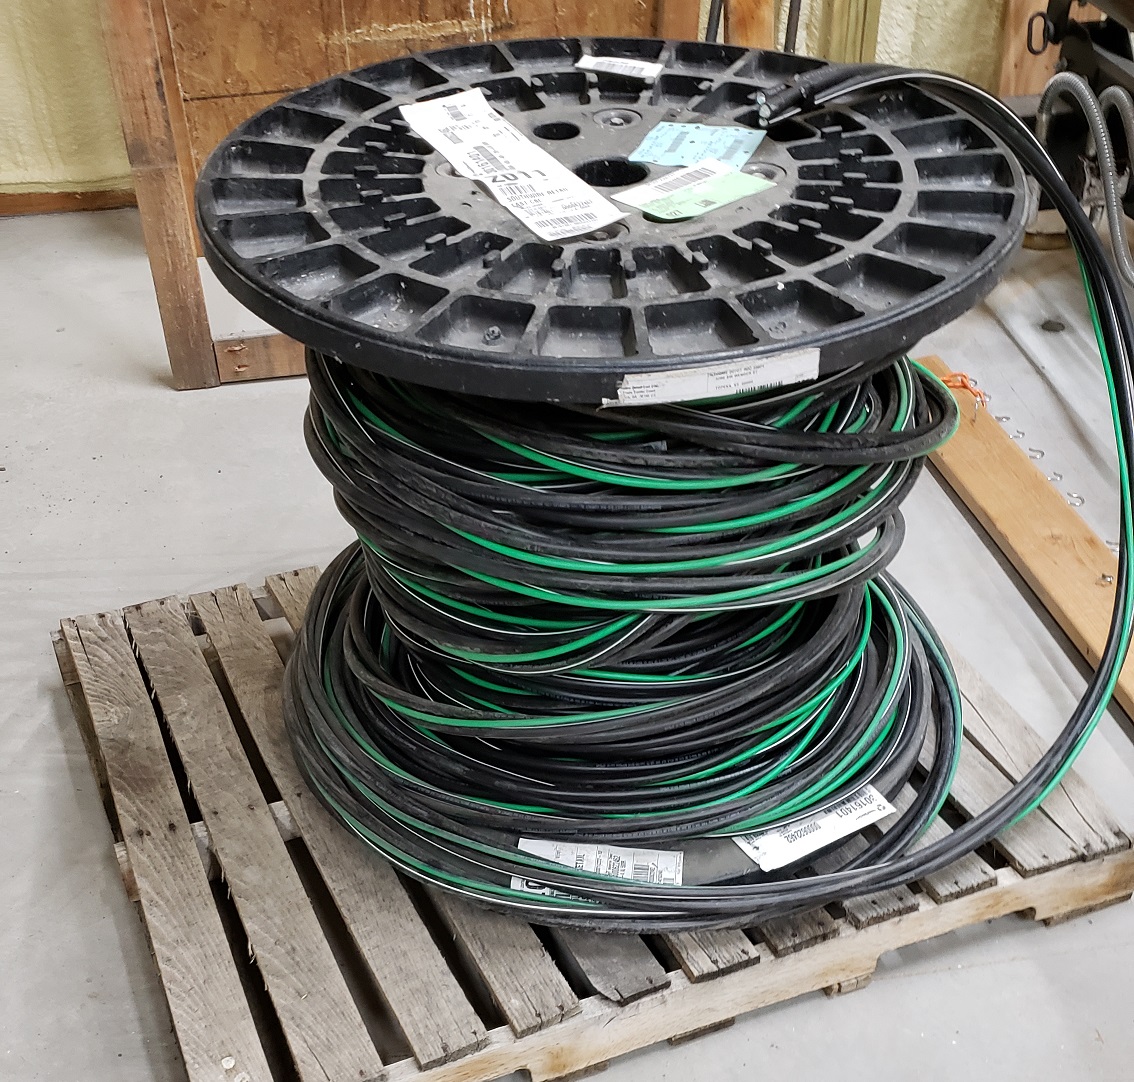 Spool of three conductor 4/0 aluminum service wire with ground